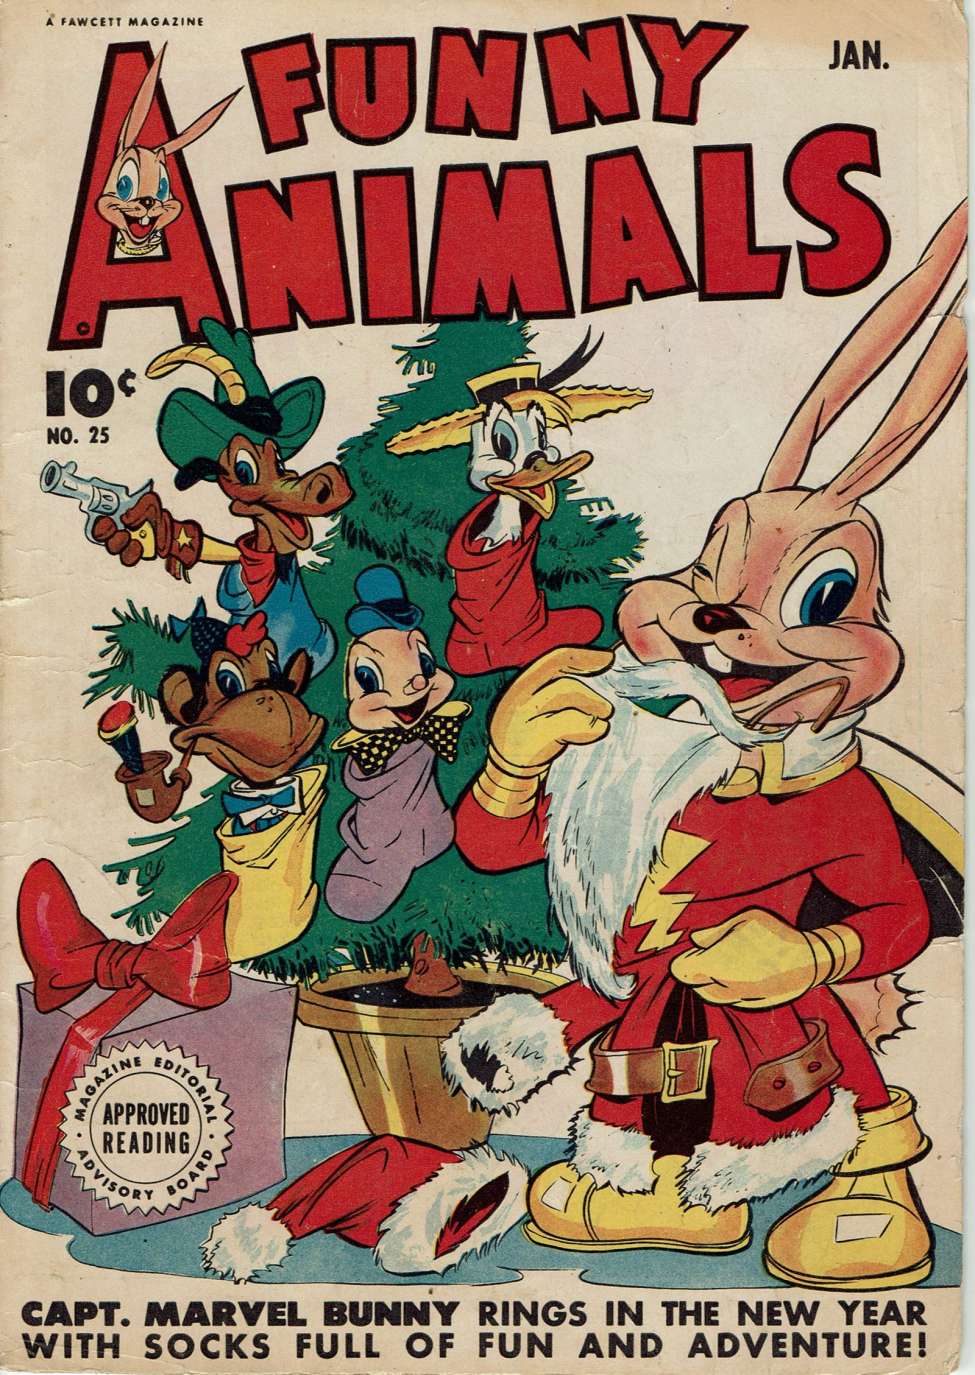 Book Cover For Fawcett's Funny Animals 25